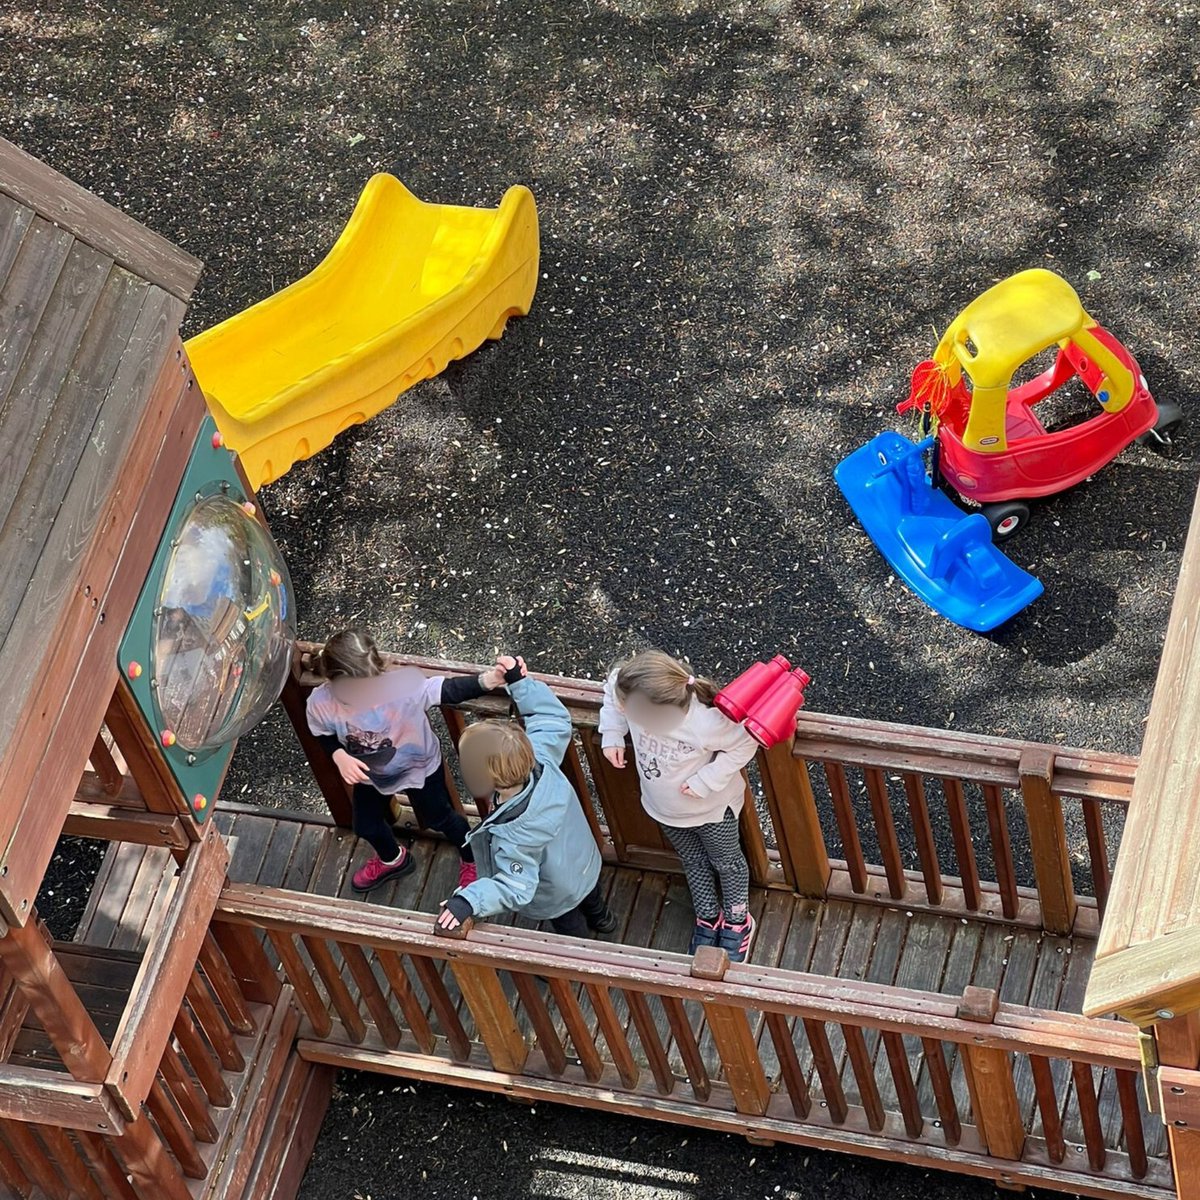 Our Easter half-term play scheme is in full swing!

Our children are having a great time exploring our adventure playground and playing games in the sunshine!

hashtag#ChildrensCharity hashtag#EasterFun hashtag#Camden